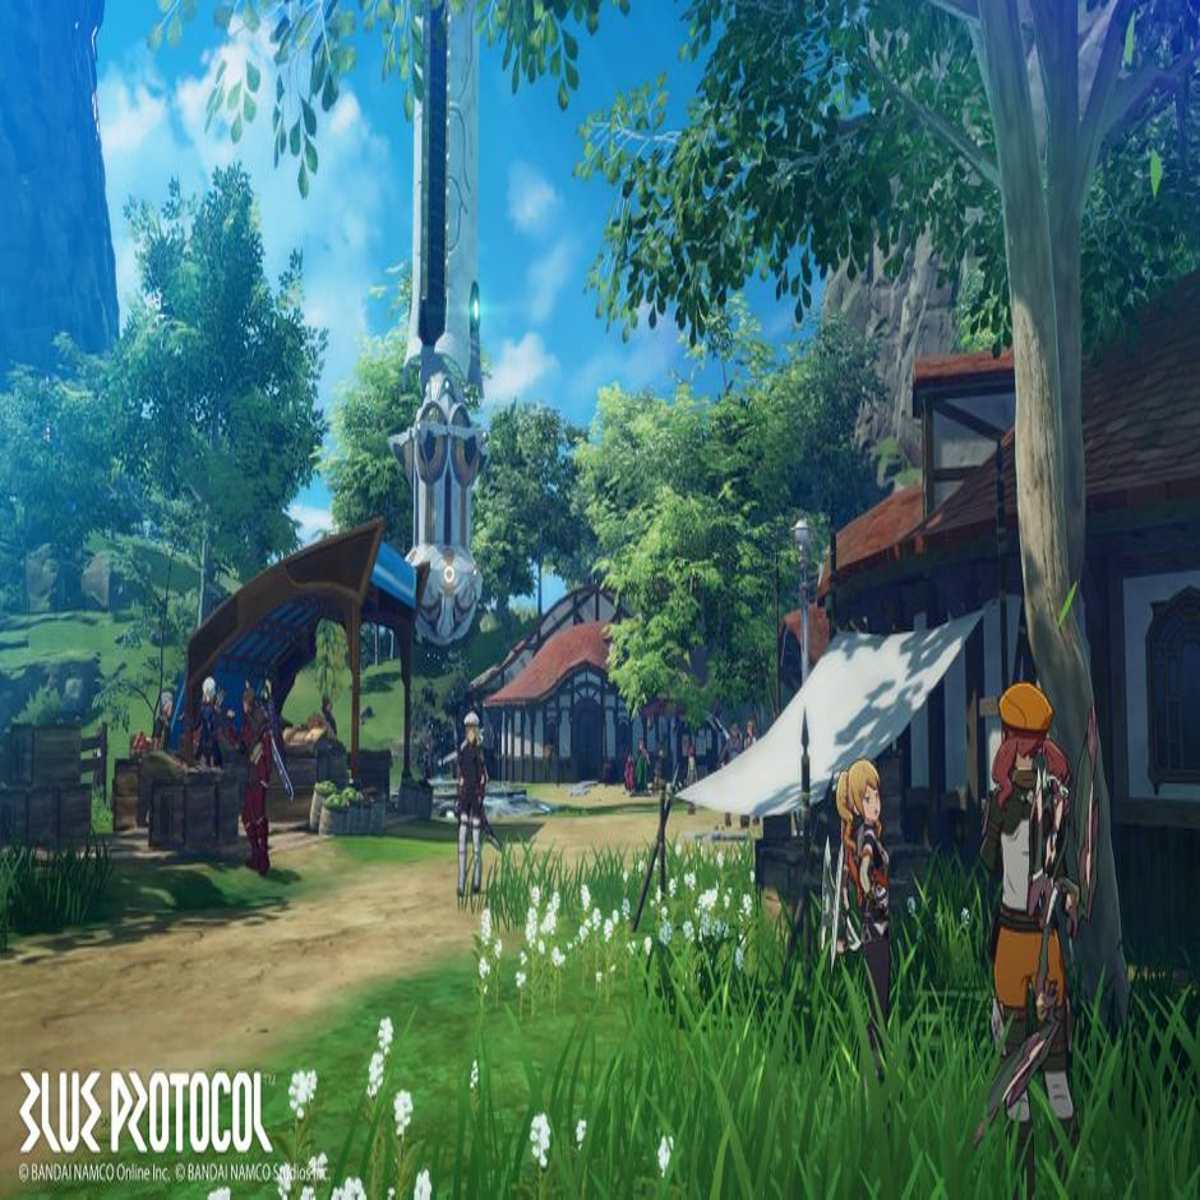 Bandai Namco MMORPG Blue Protocol headed to PC and consoles in the West  next year